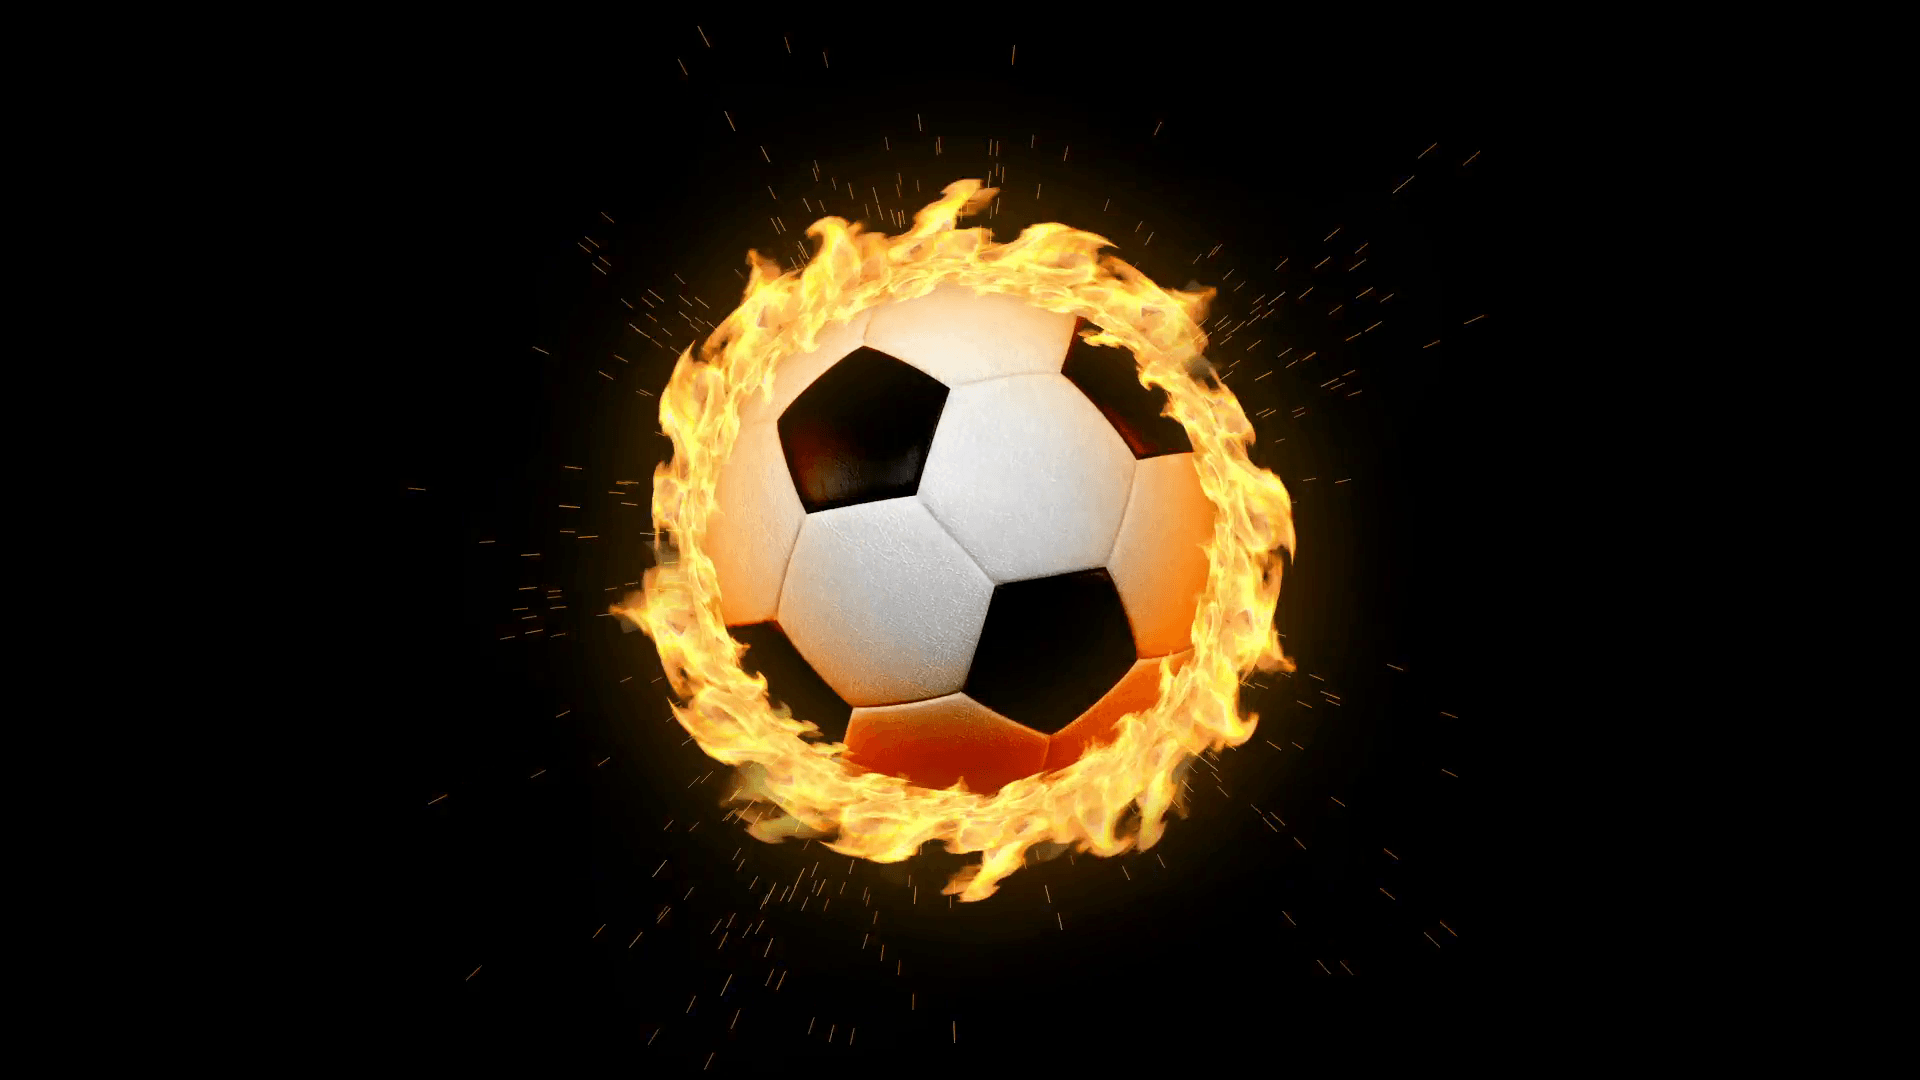 animated soccer or football spinning ball on fire Motion Background